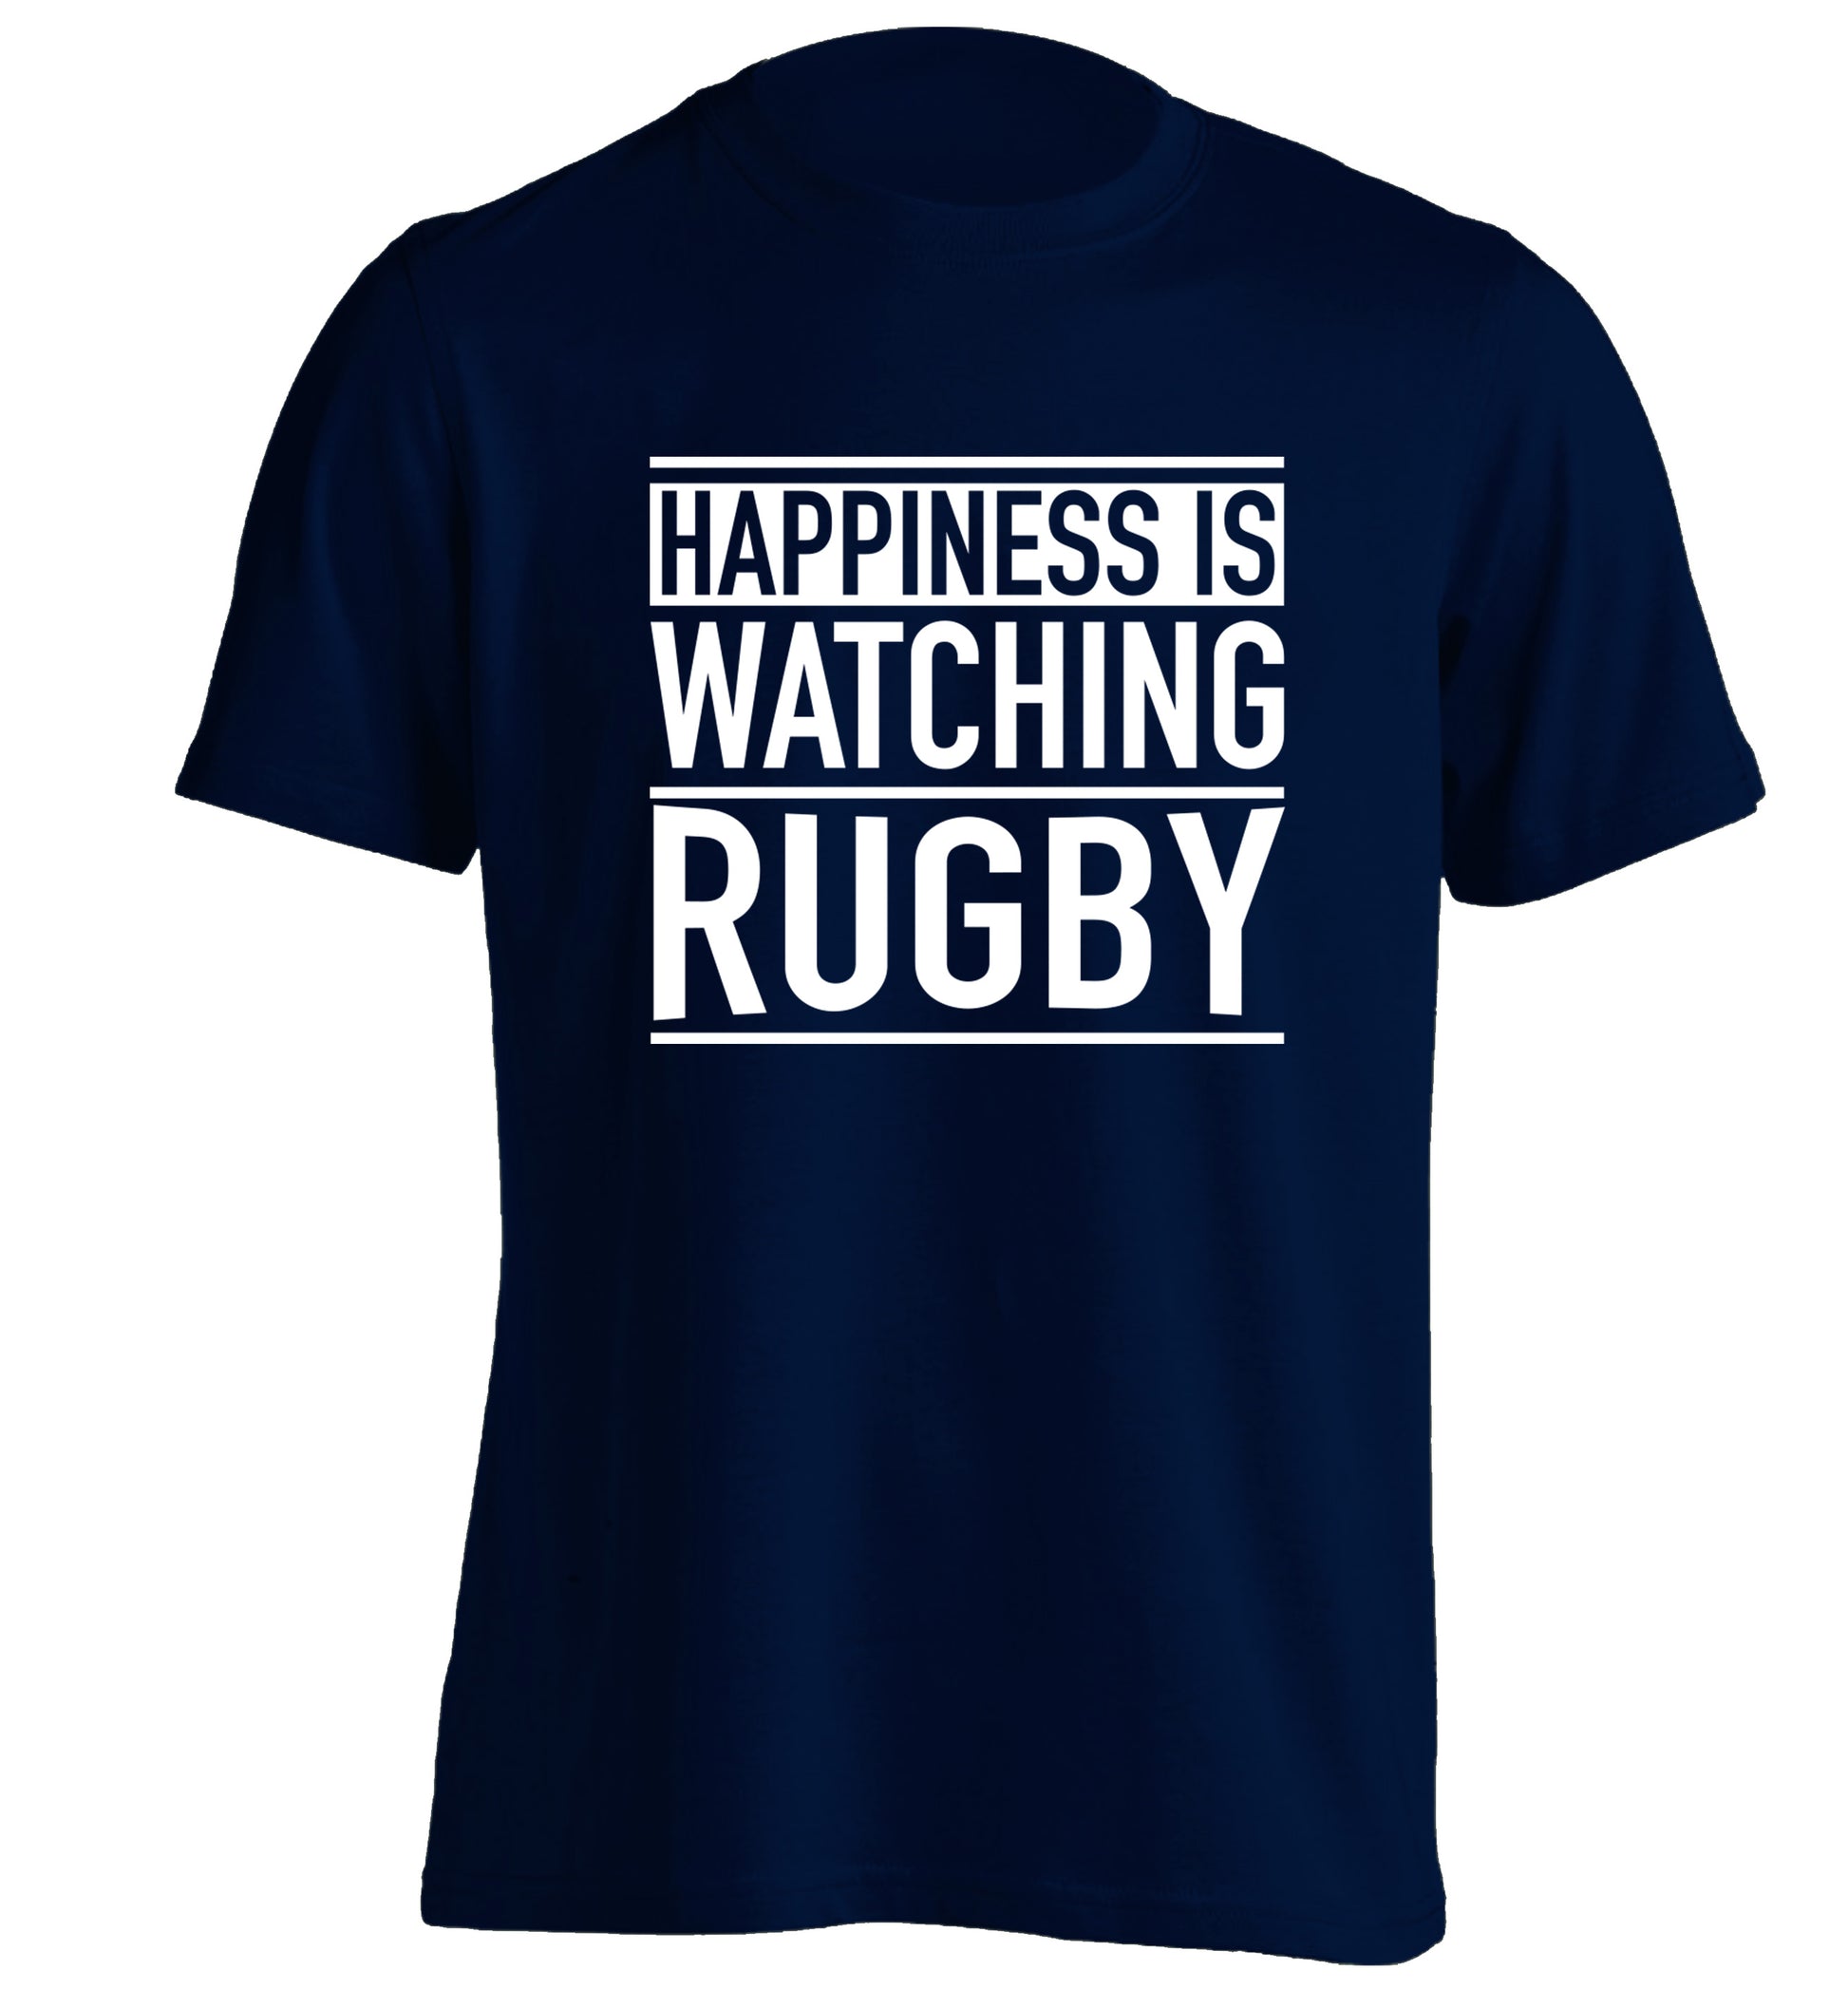 Happiness is watching rugby adults unisex navy Tshirt 2XL